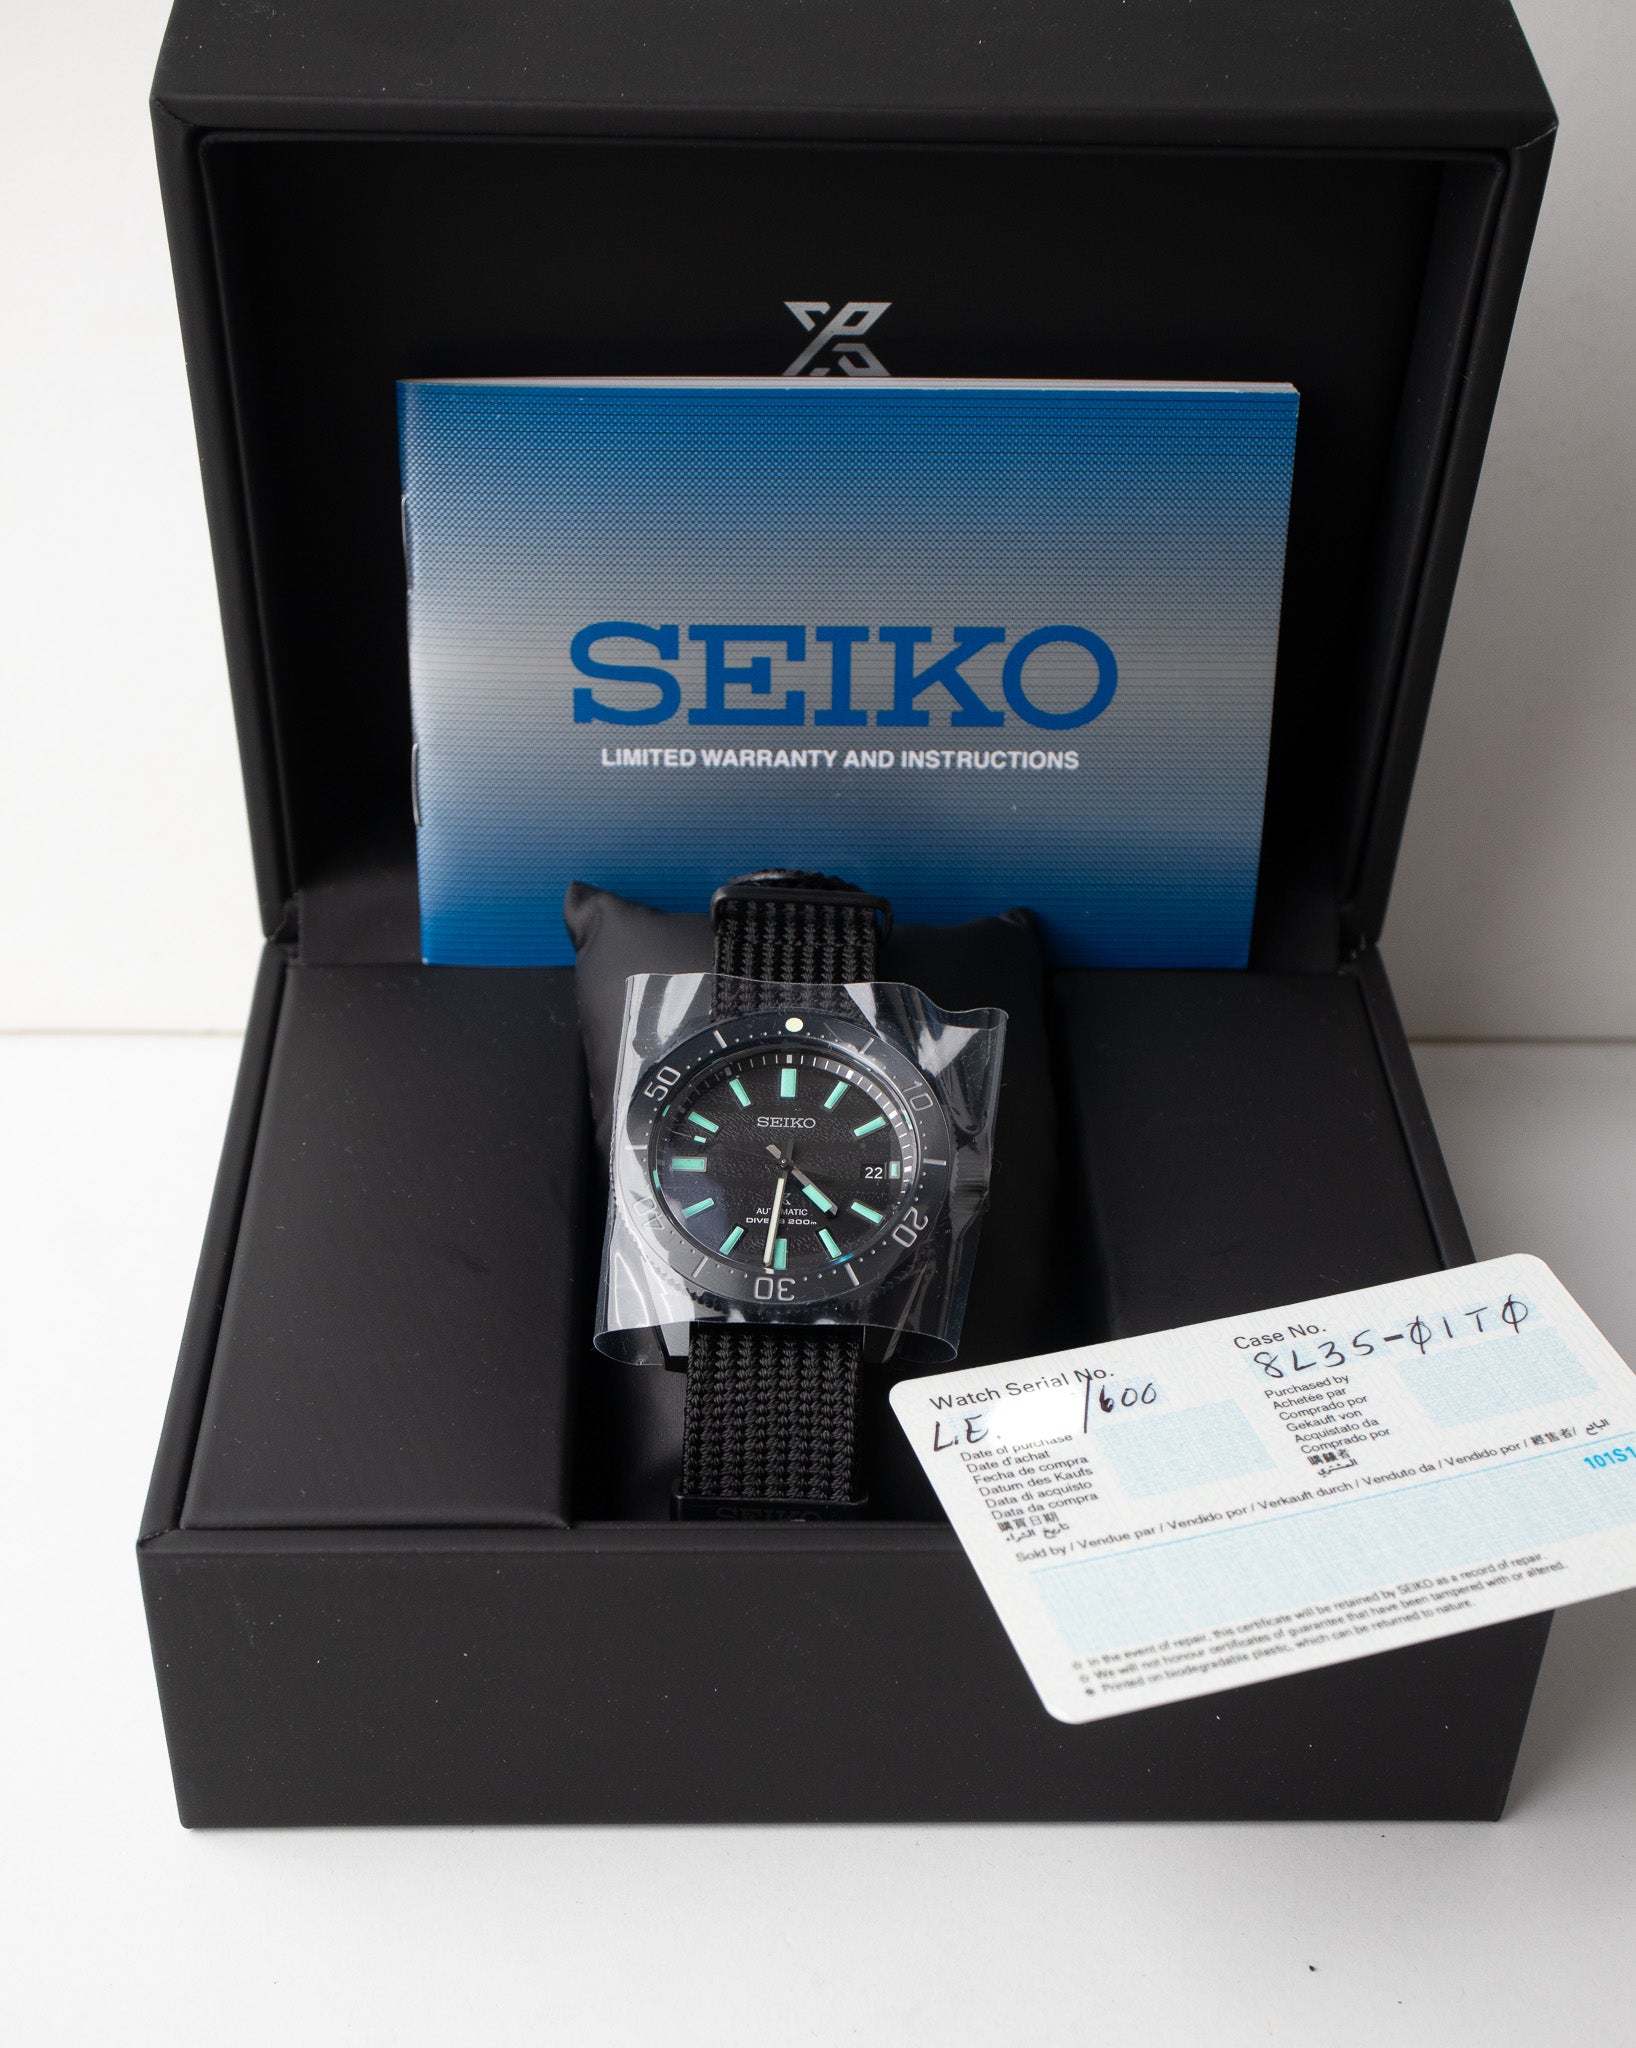 Seiko Prospex reference SLA067 watch with the watch box, booklets, and warranty card